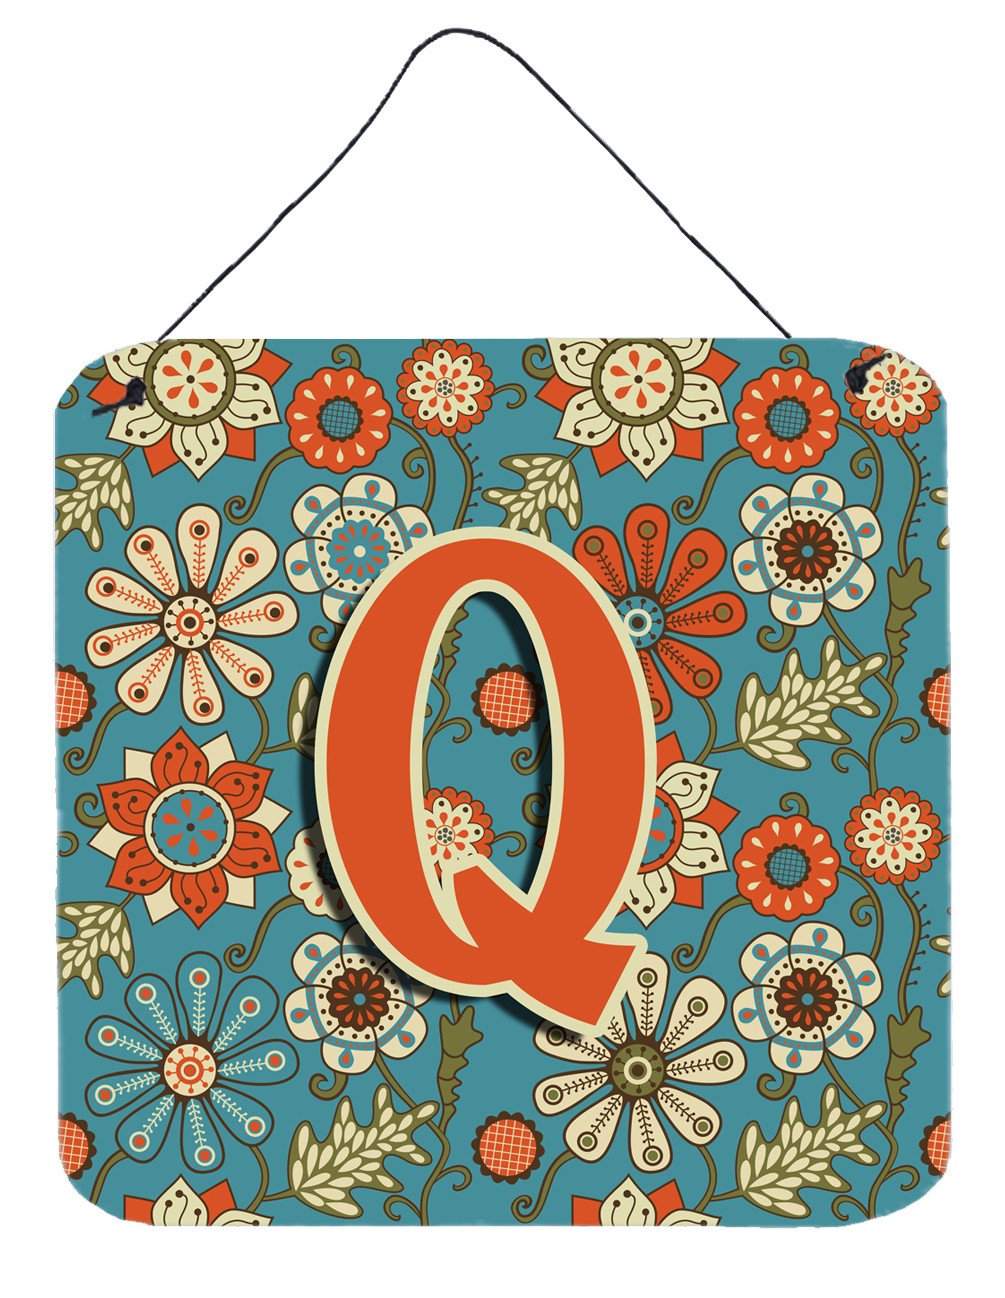 Letter Q Flowers Retro Blue Wall or Door Hanging Prints CJ2012-QDS66 by Caroline's Treasures